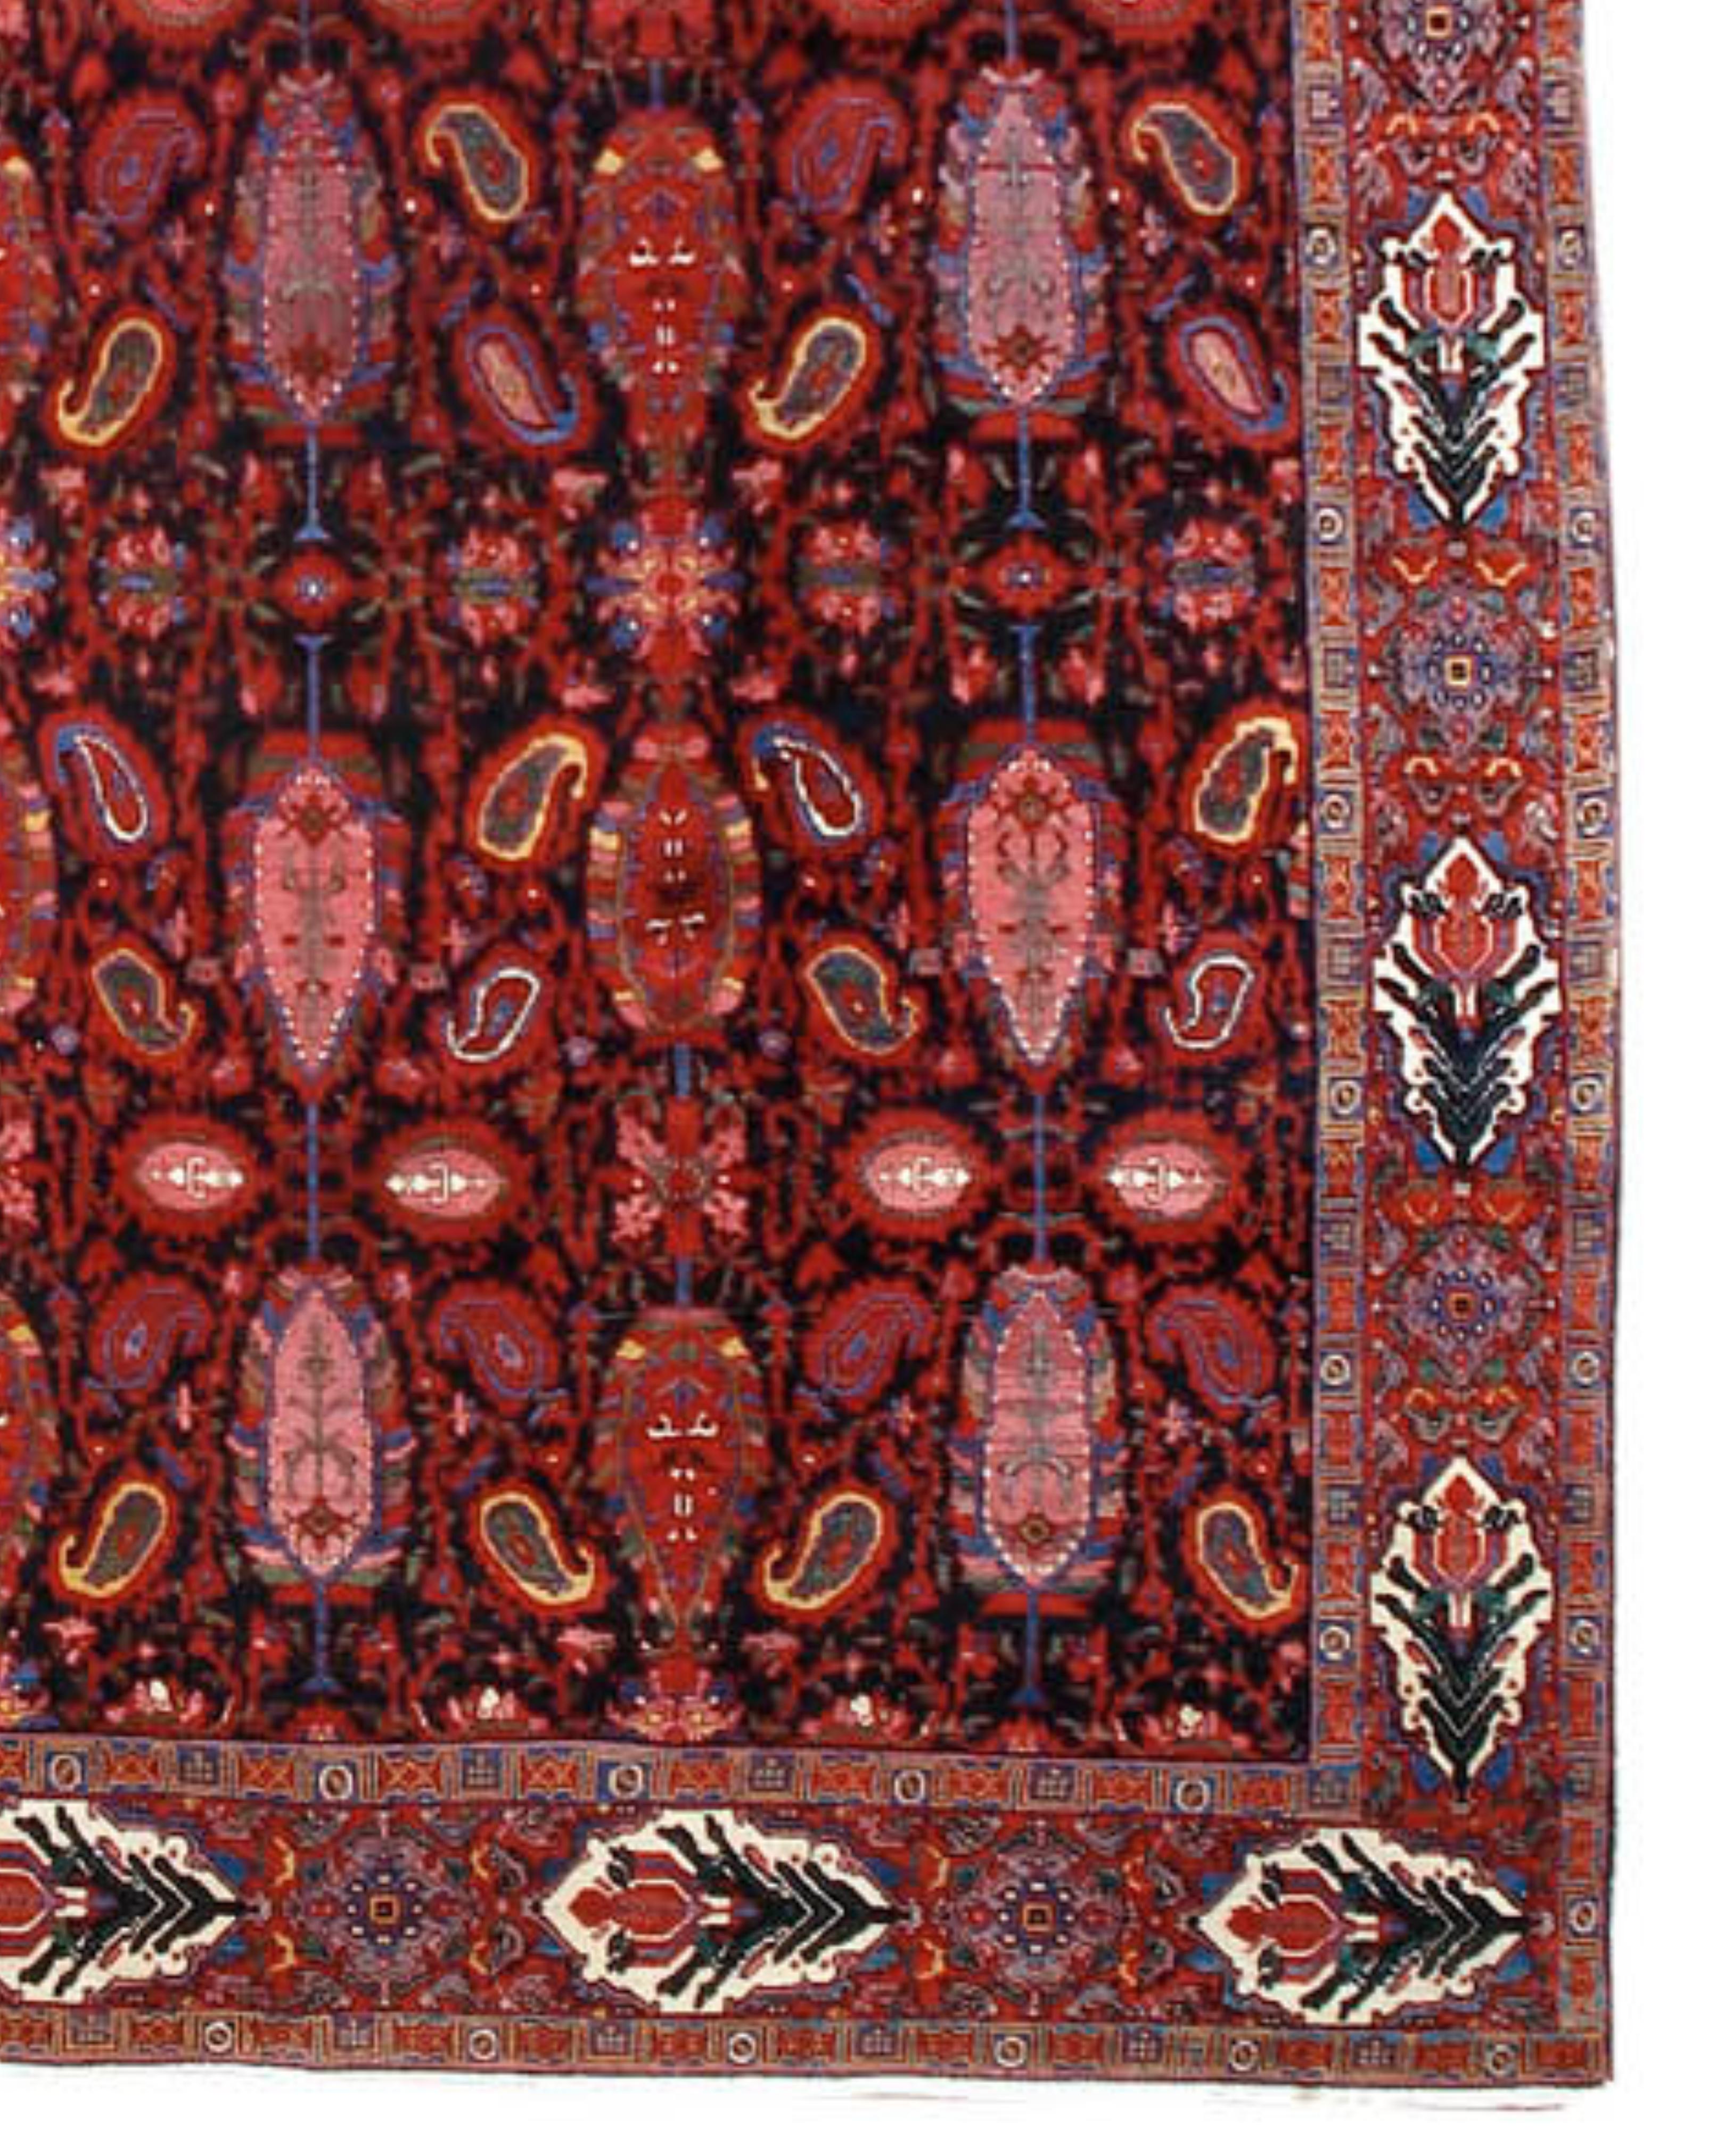 Antique Oversized Large Persian Malayer Carpet, c. 1900

Weavings from Malayer in western Persia are generally of the scatter size variety. This grand over-sized piece is something rare and special. Long elongated palmettes are drawn in an all-over